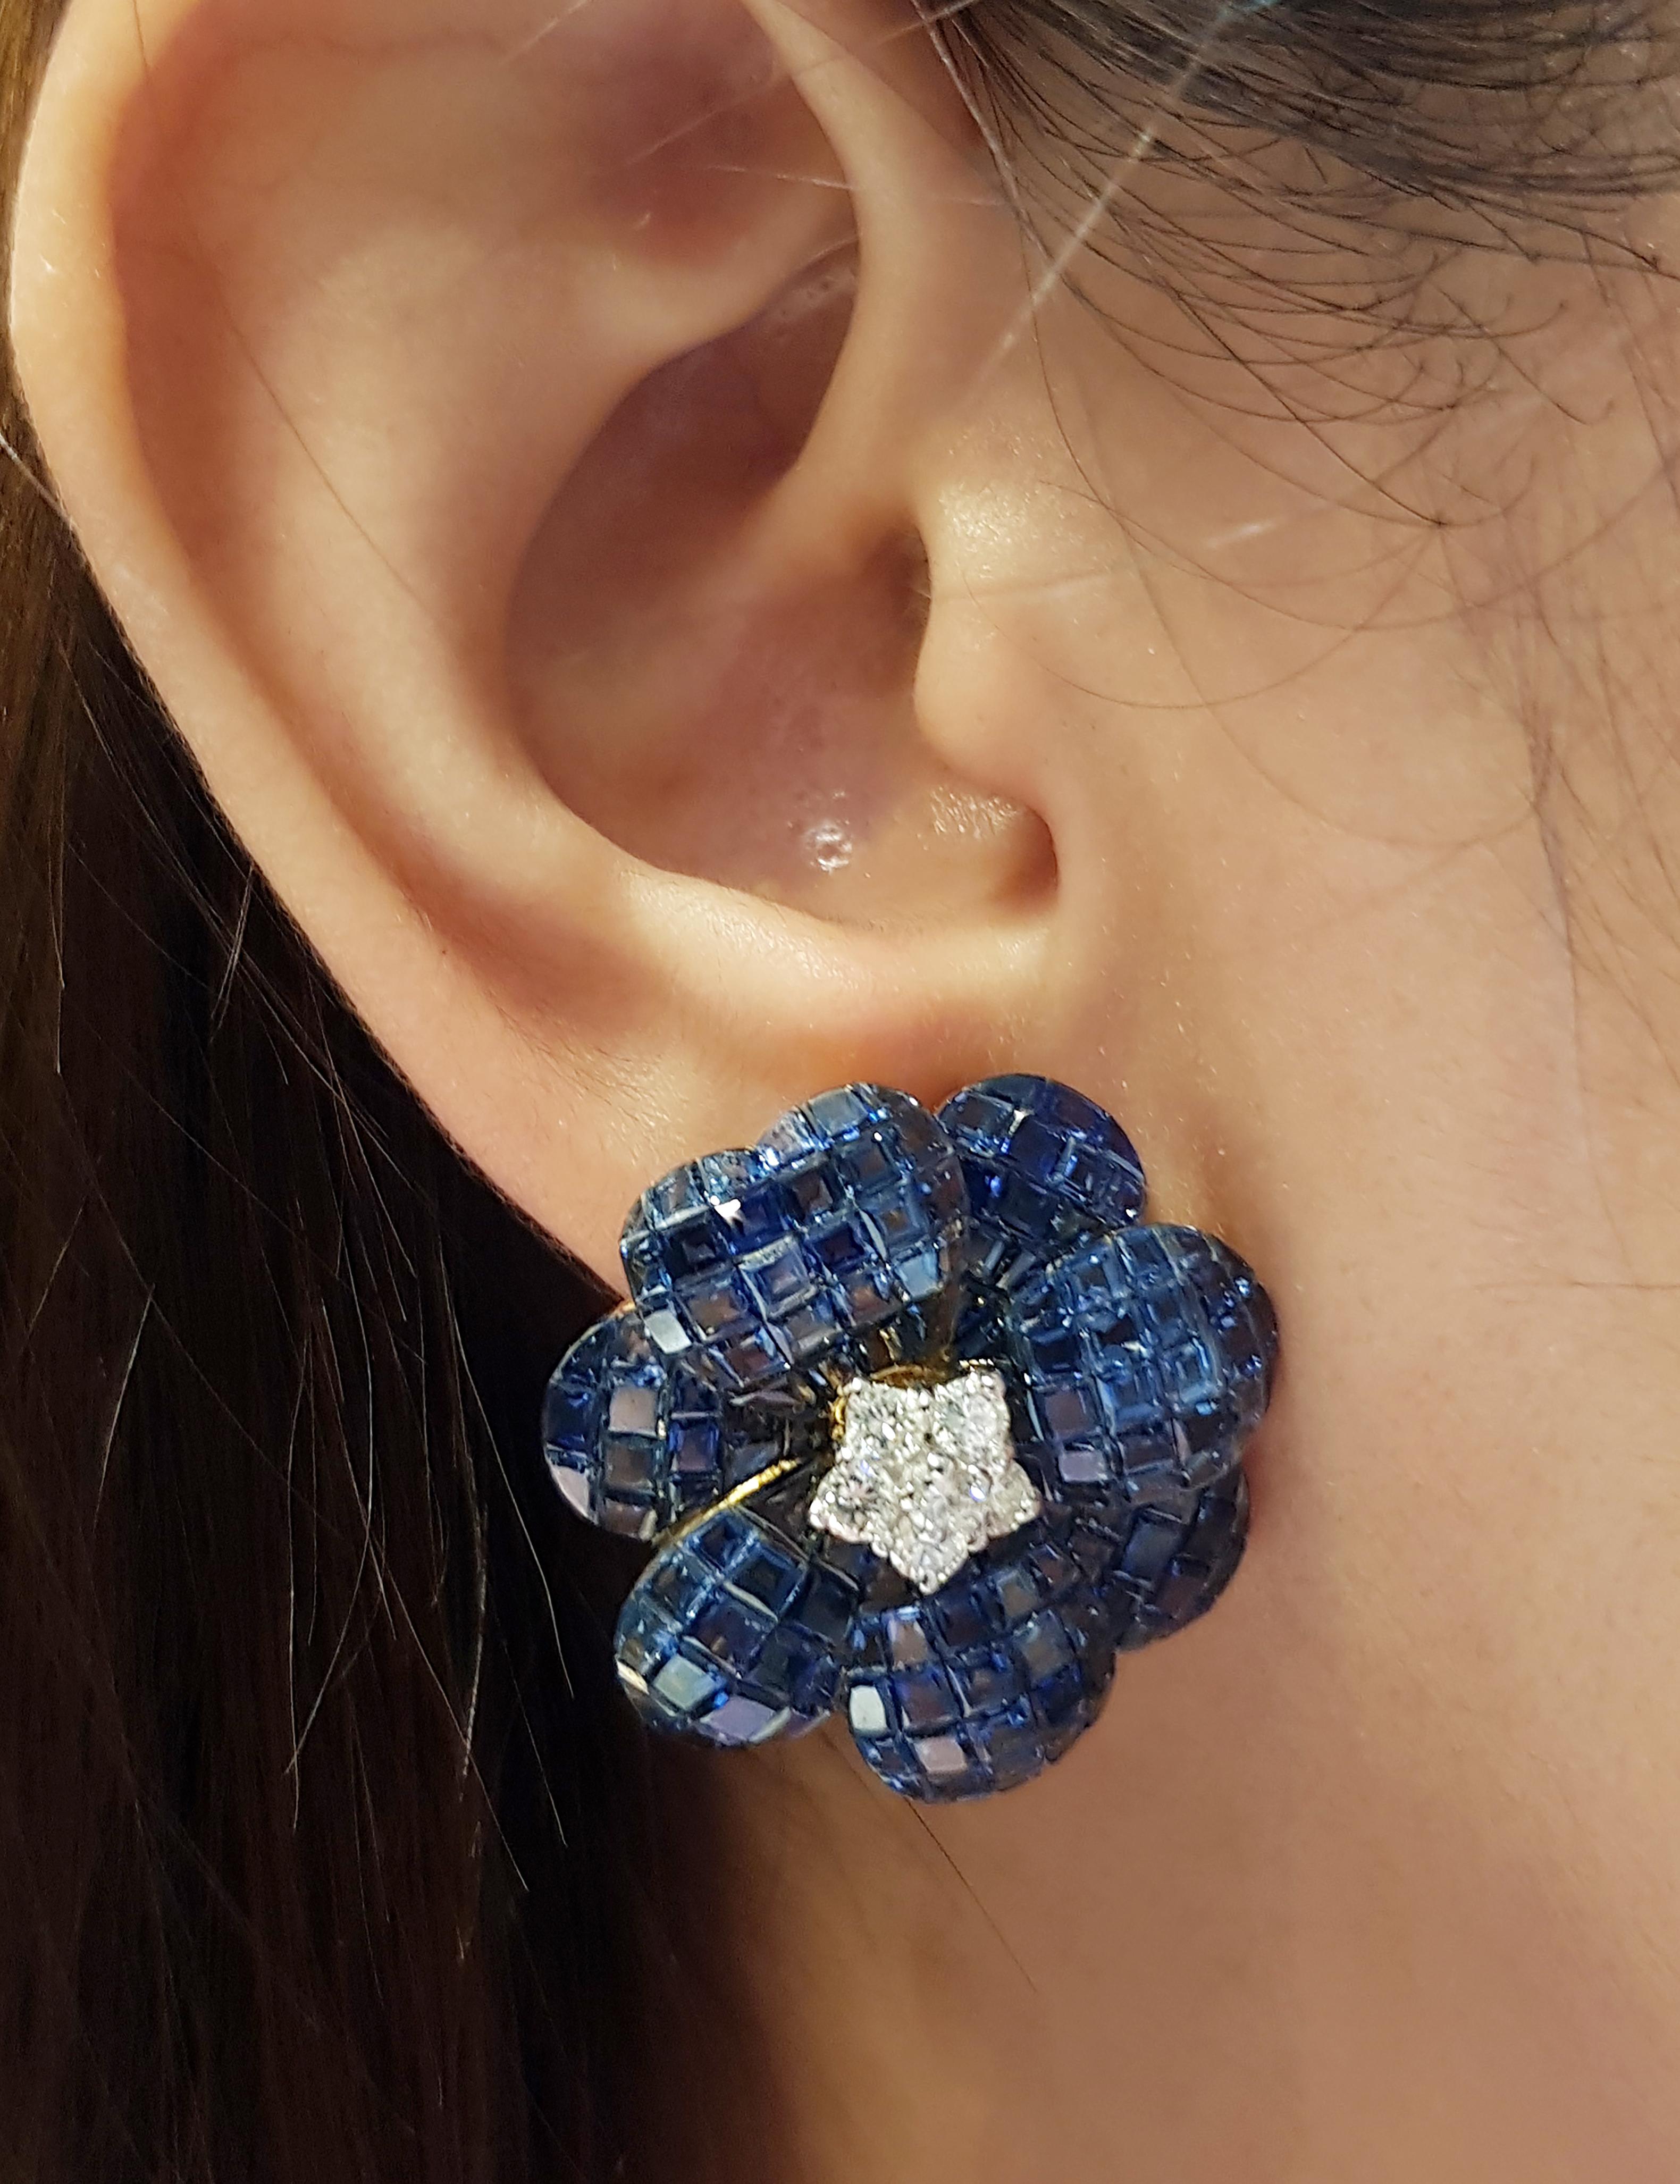 Blue Sapphire 61.70 carats with Diamond 0.80 carat Earrings set in 18 Karat Gold Settings

Width: 2.6 cm 
Length: 2.6 cm
Total Weight: 22.95 grams

